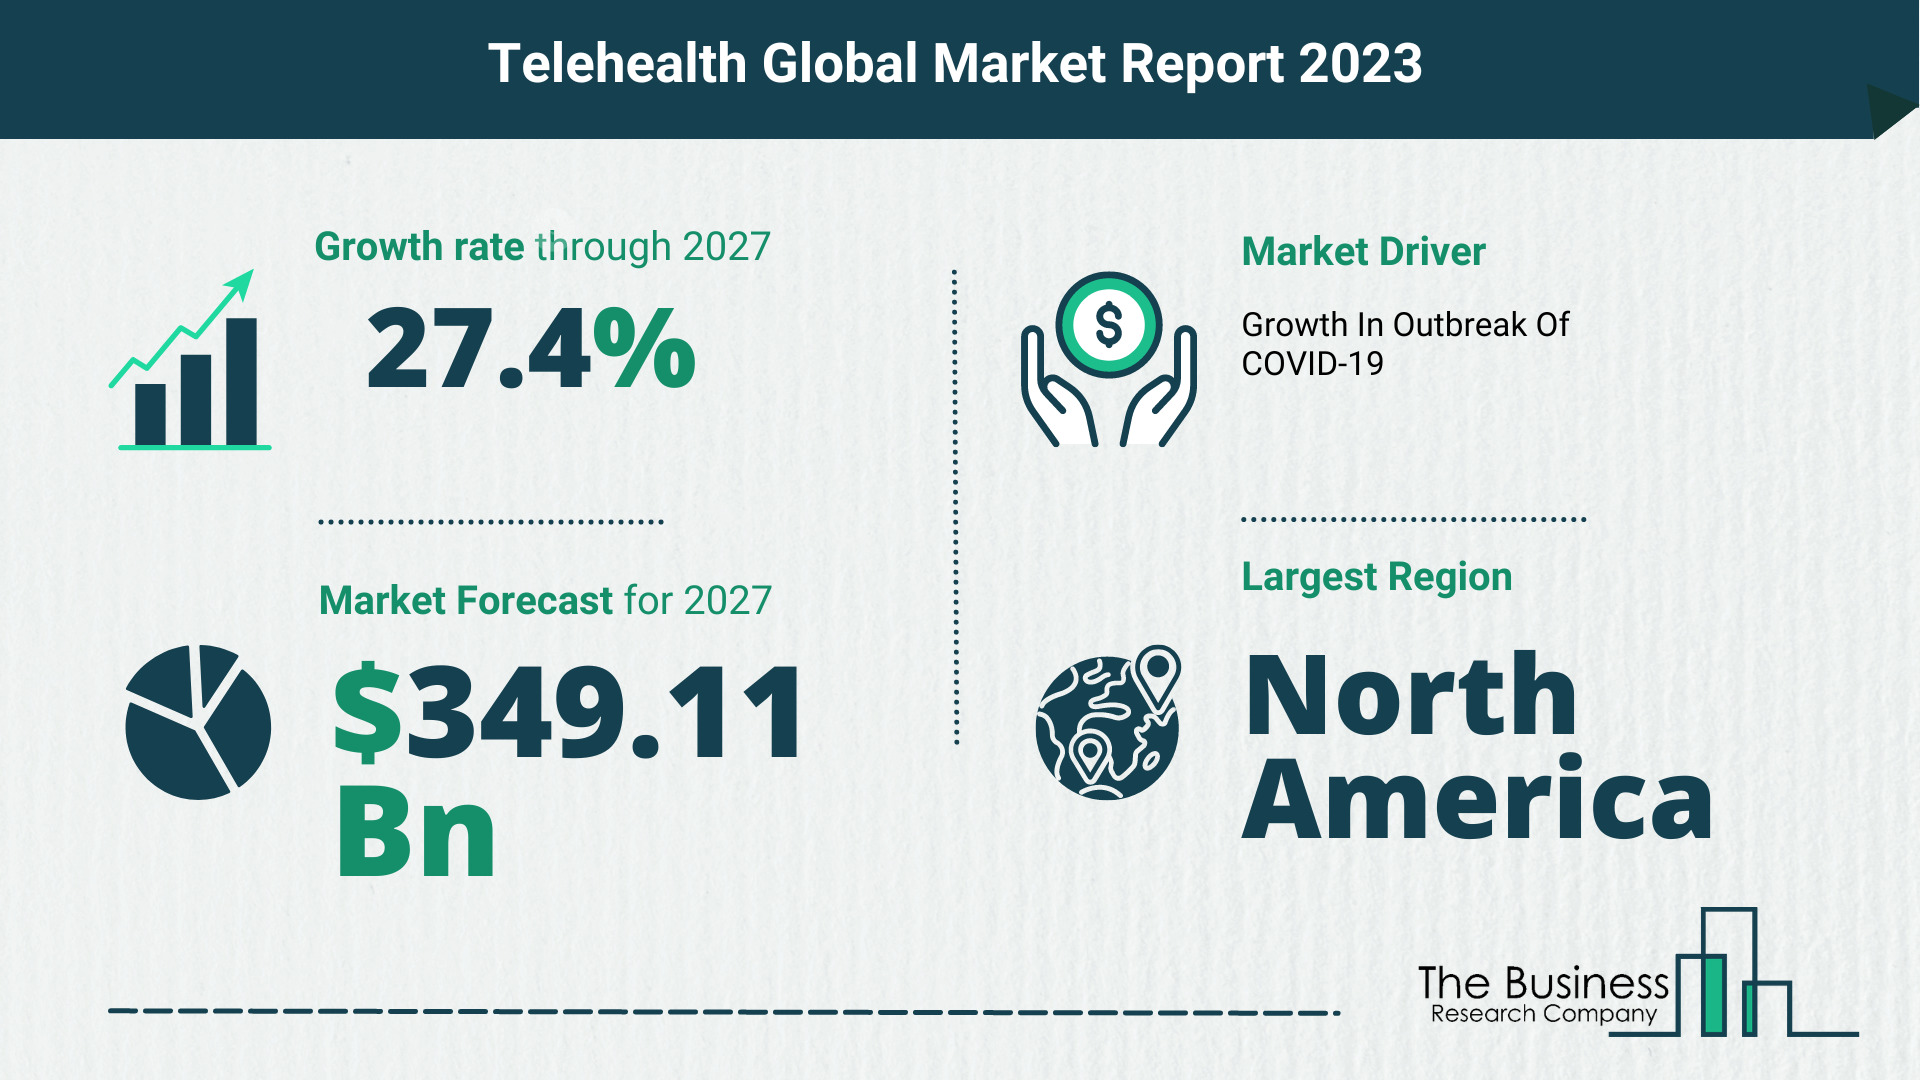 Global Telehealth Market Opportunities And Strategies 2023